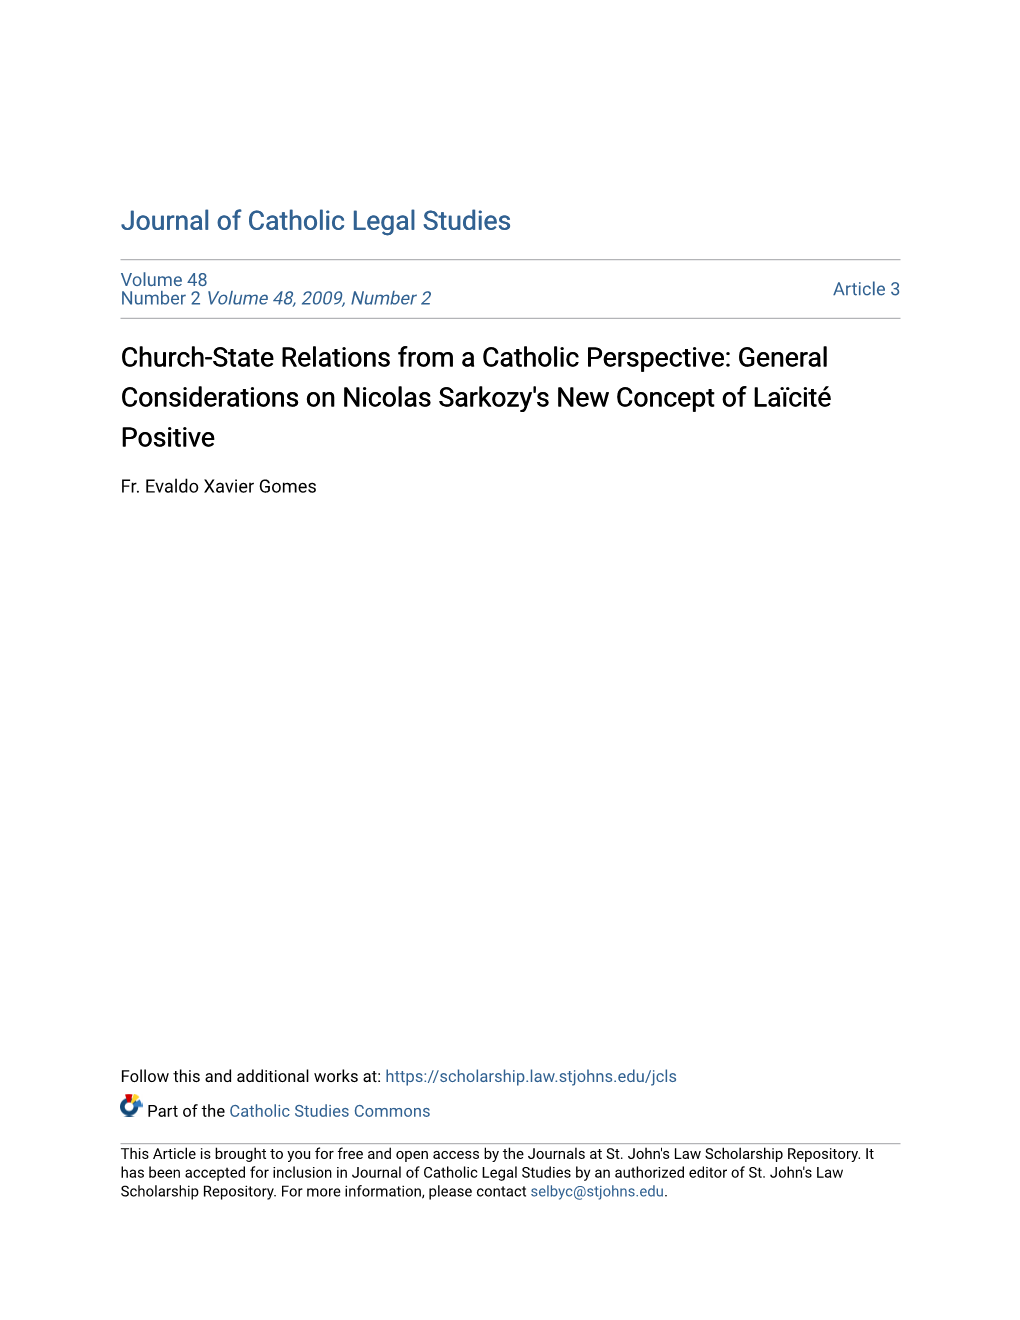 Church-State Relations from a Catholic Perspective: General Considerations on Nicolas Sarkozy's New Concept of Laïcité Positive